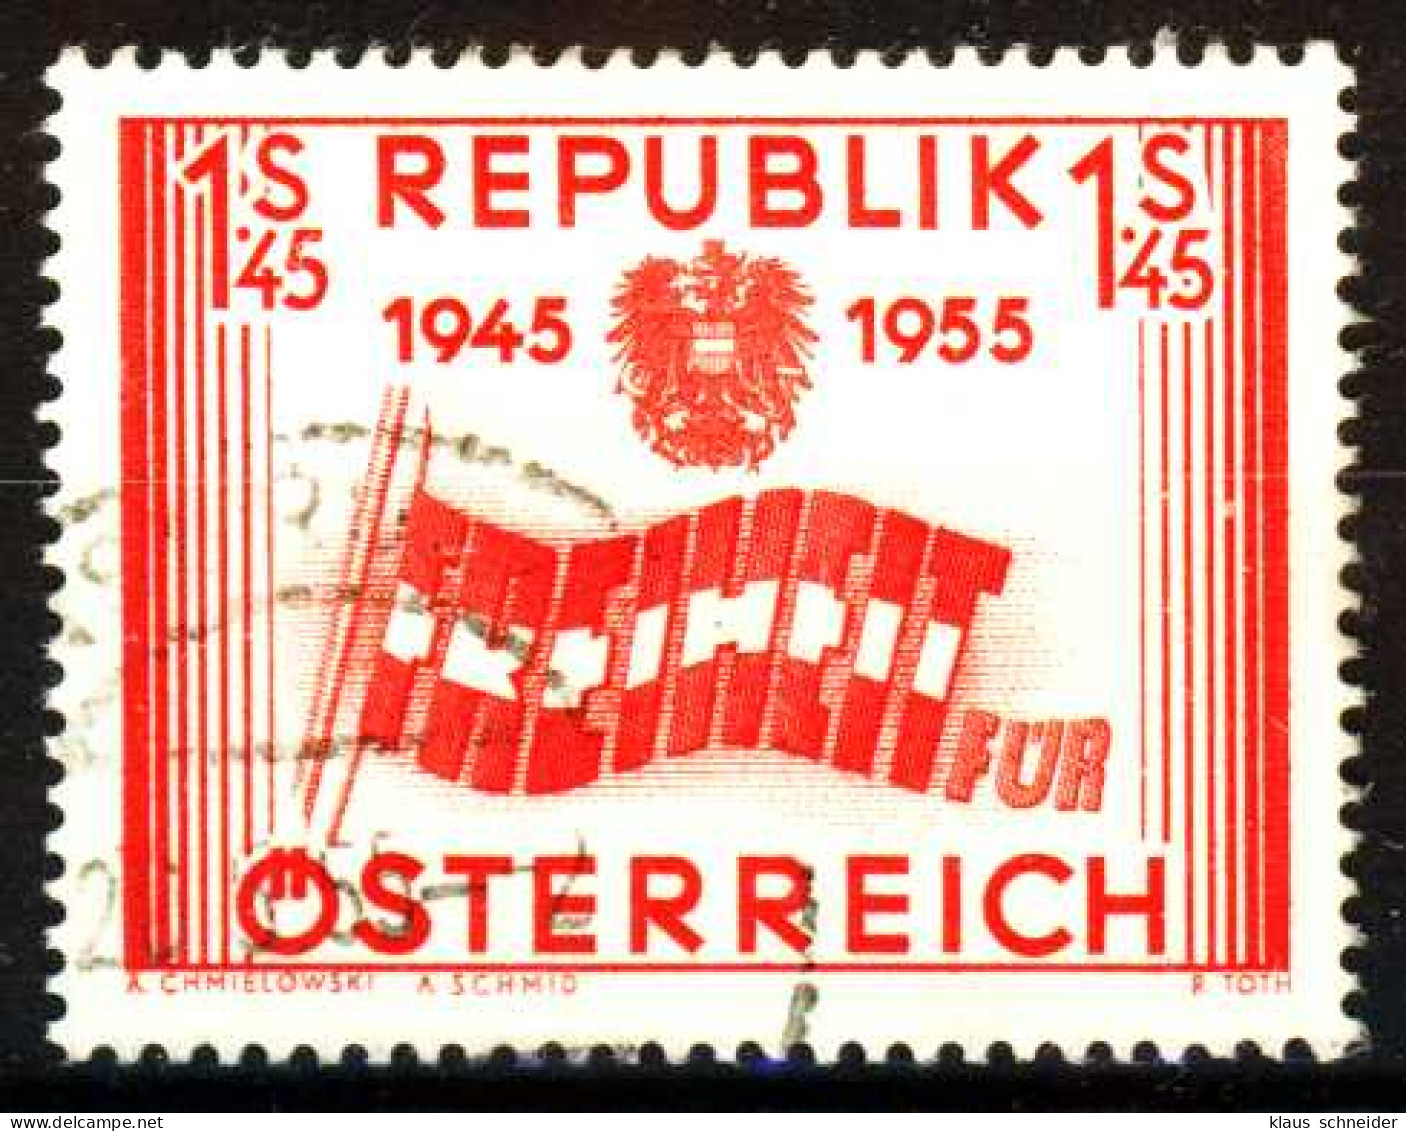 ÖSTERREICH 1955 Nr 1014 Gestempelt X280D56 - Used Stamps